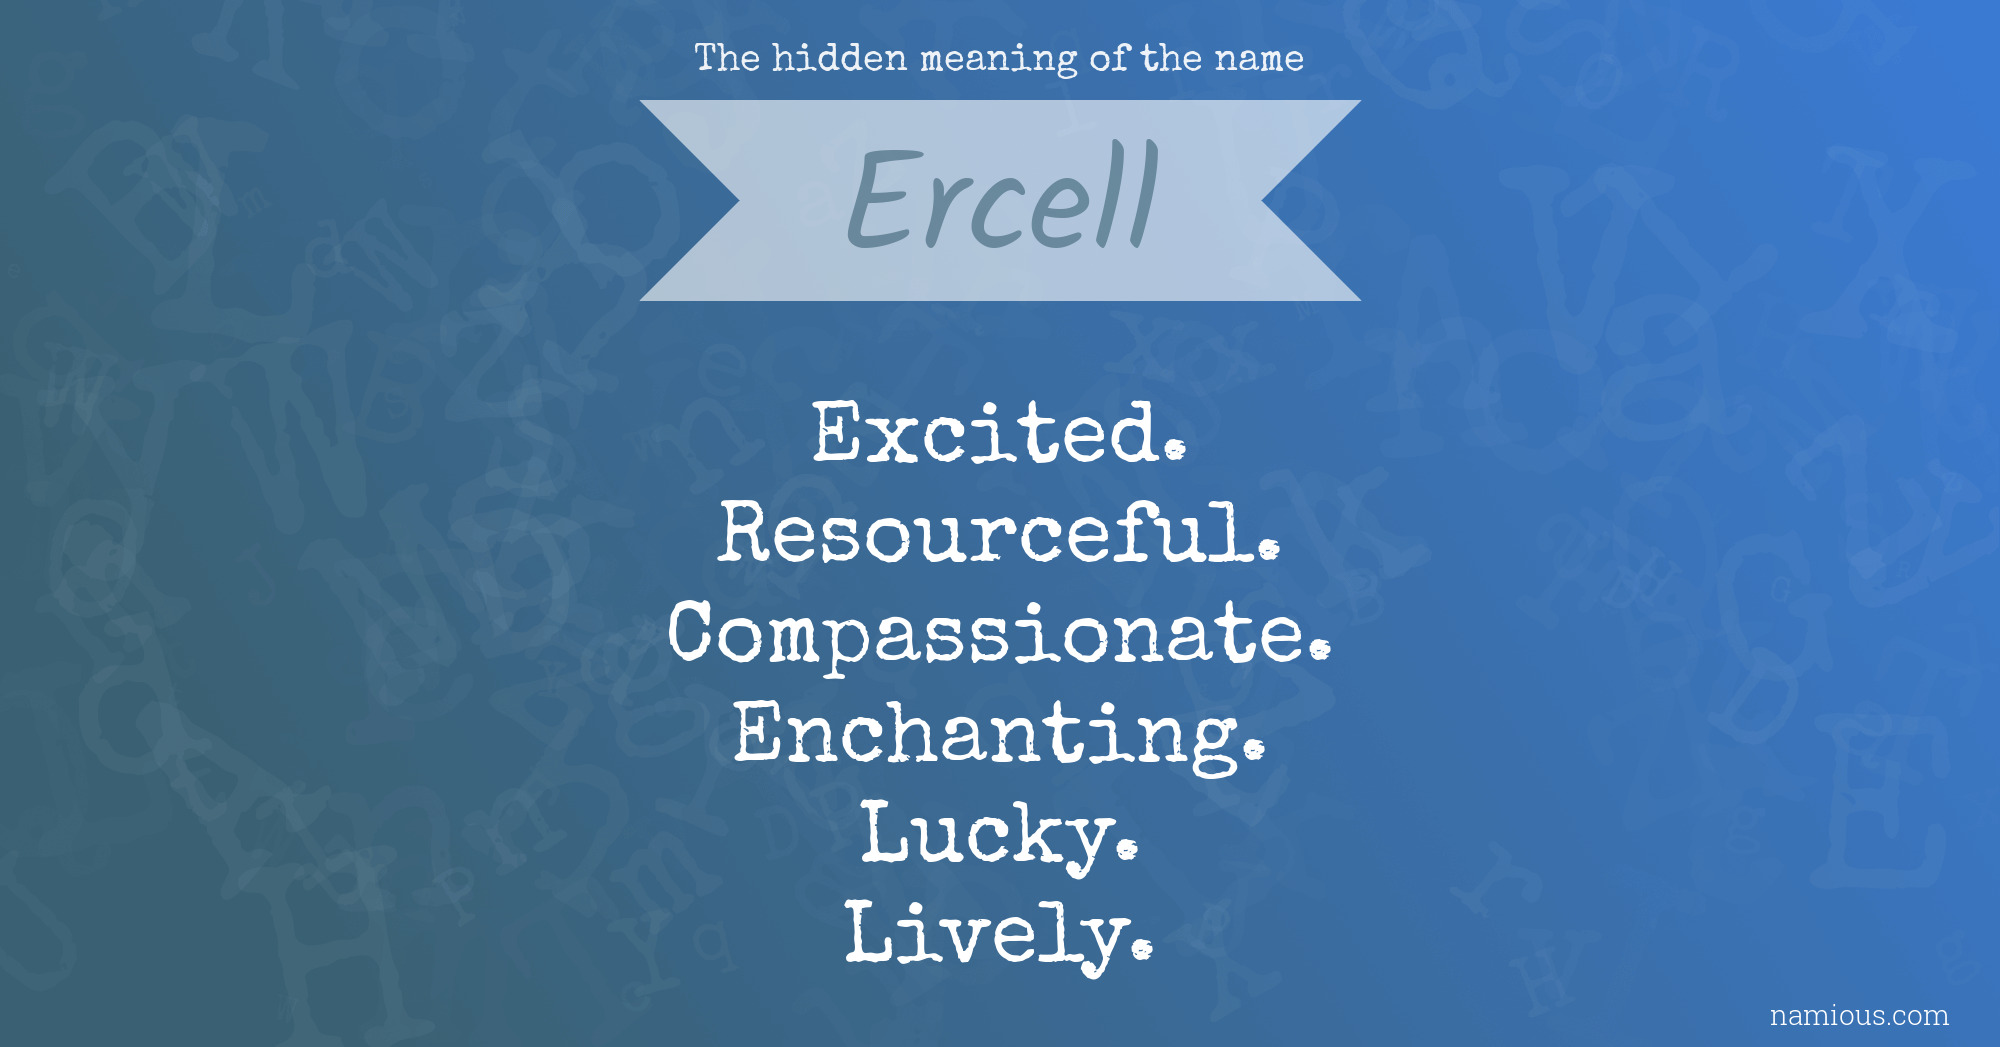 The hidden meaning of the name Ercell